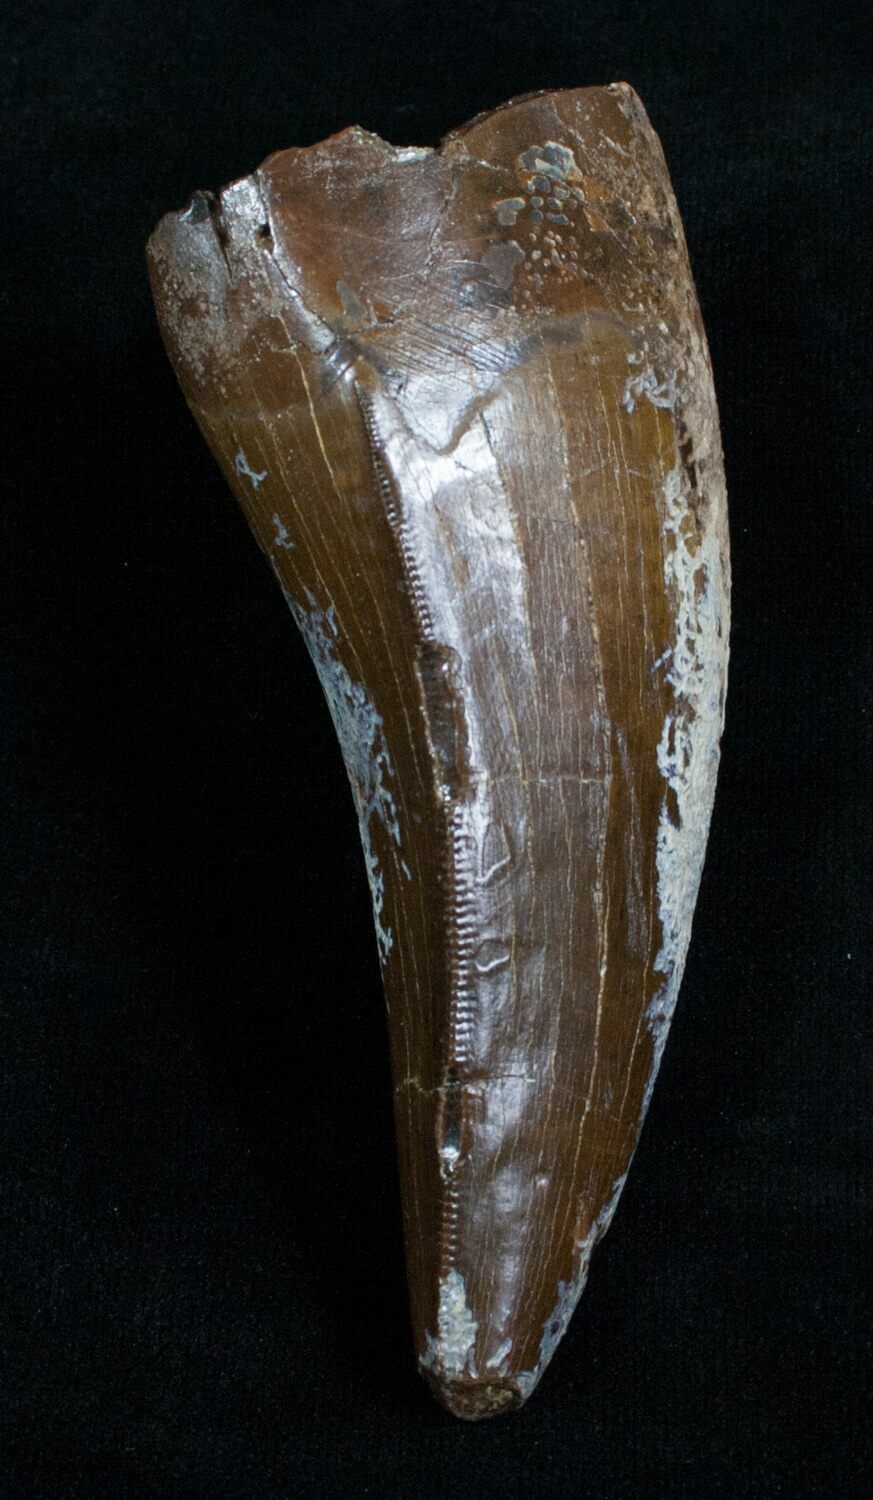 3.60" T-Rex Tooth - Excellent Preservation! For Sale (#5941